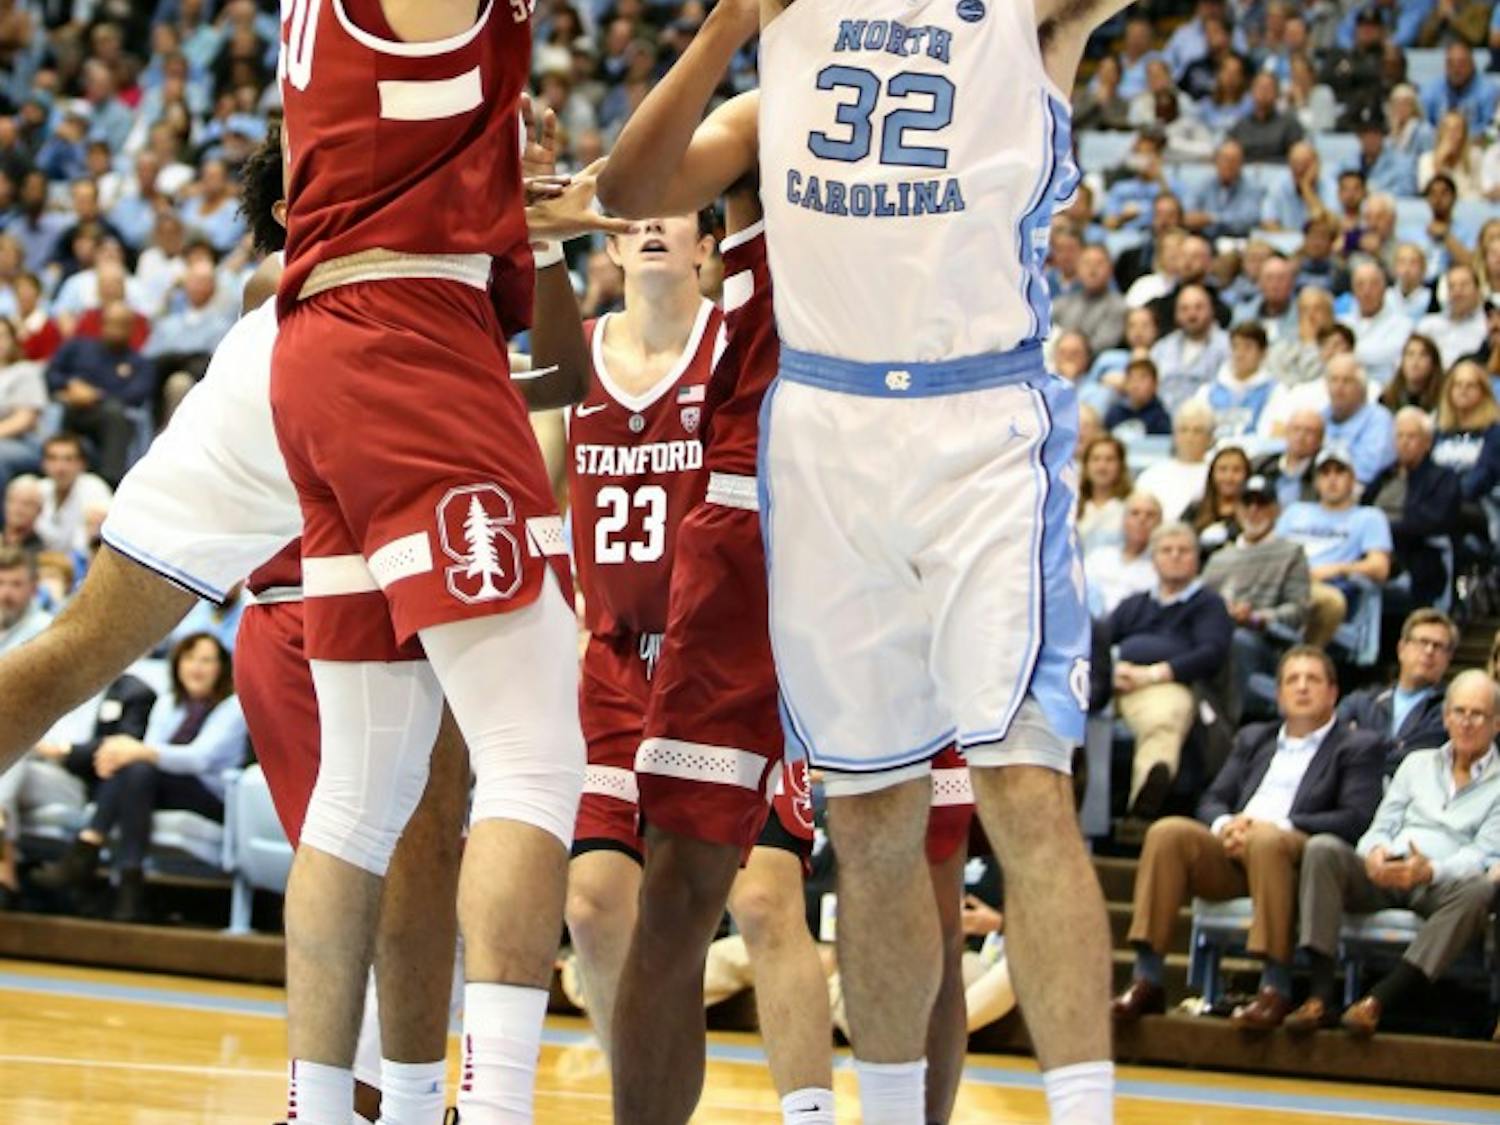 UNC forward Luke Maye (32) guards Stanford center Josh Sharma (20) as he pulls up for a shot in the Dean Smith Center on Monday, Nov. 12, 2018. UNC won 90-72.